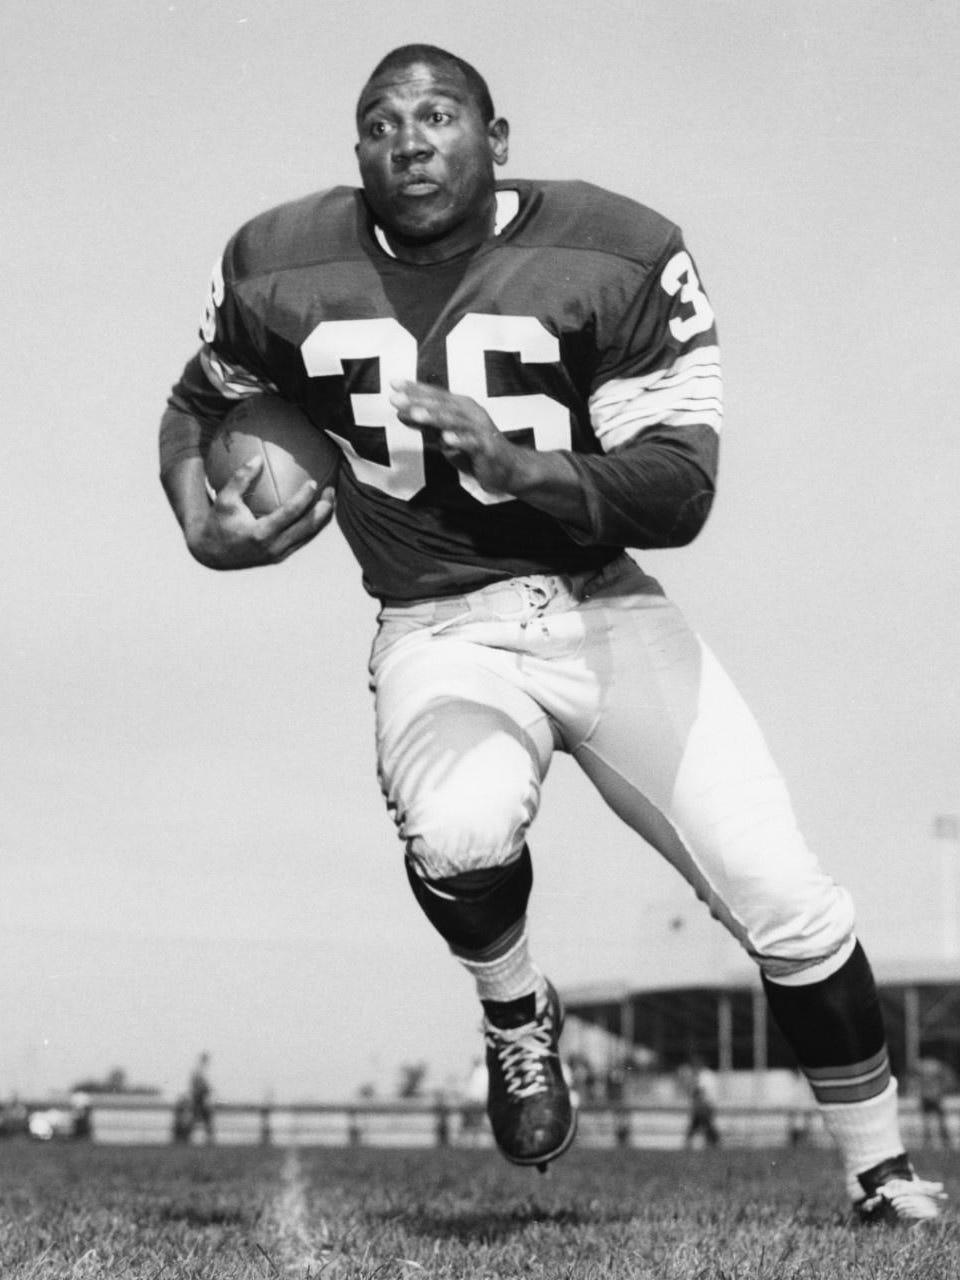 Ben Wilson played only one season with the Green Bay Packers due to knee and foot injuries, but he was a surprise starter in Super Bowl II.